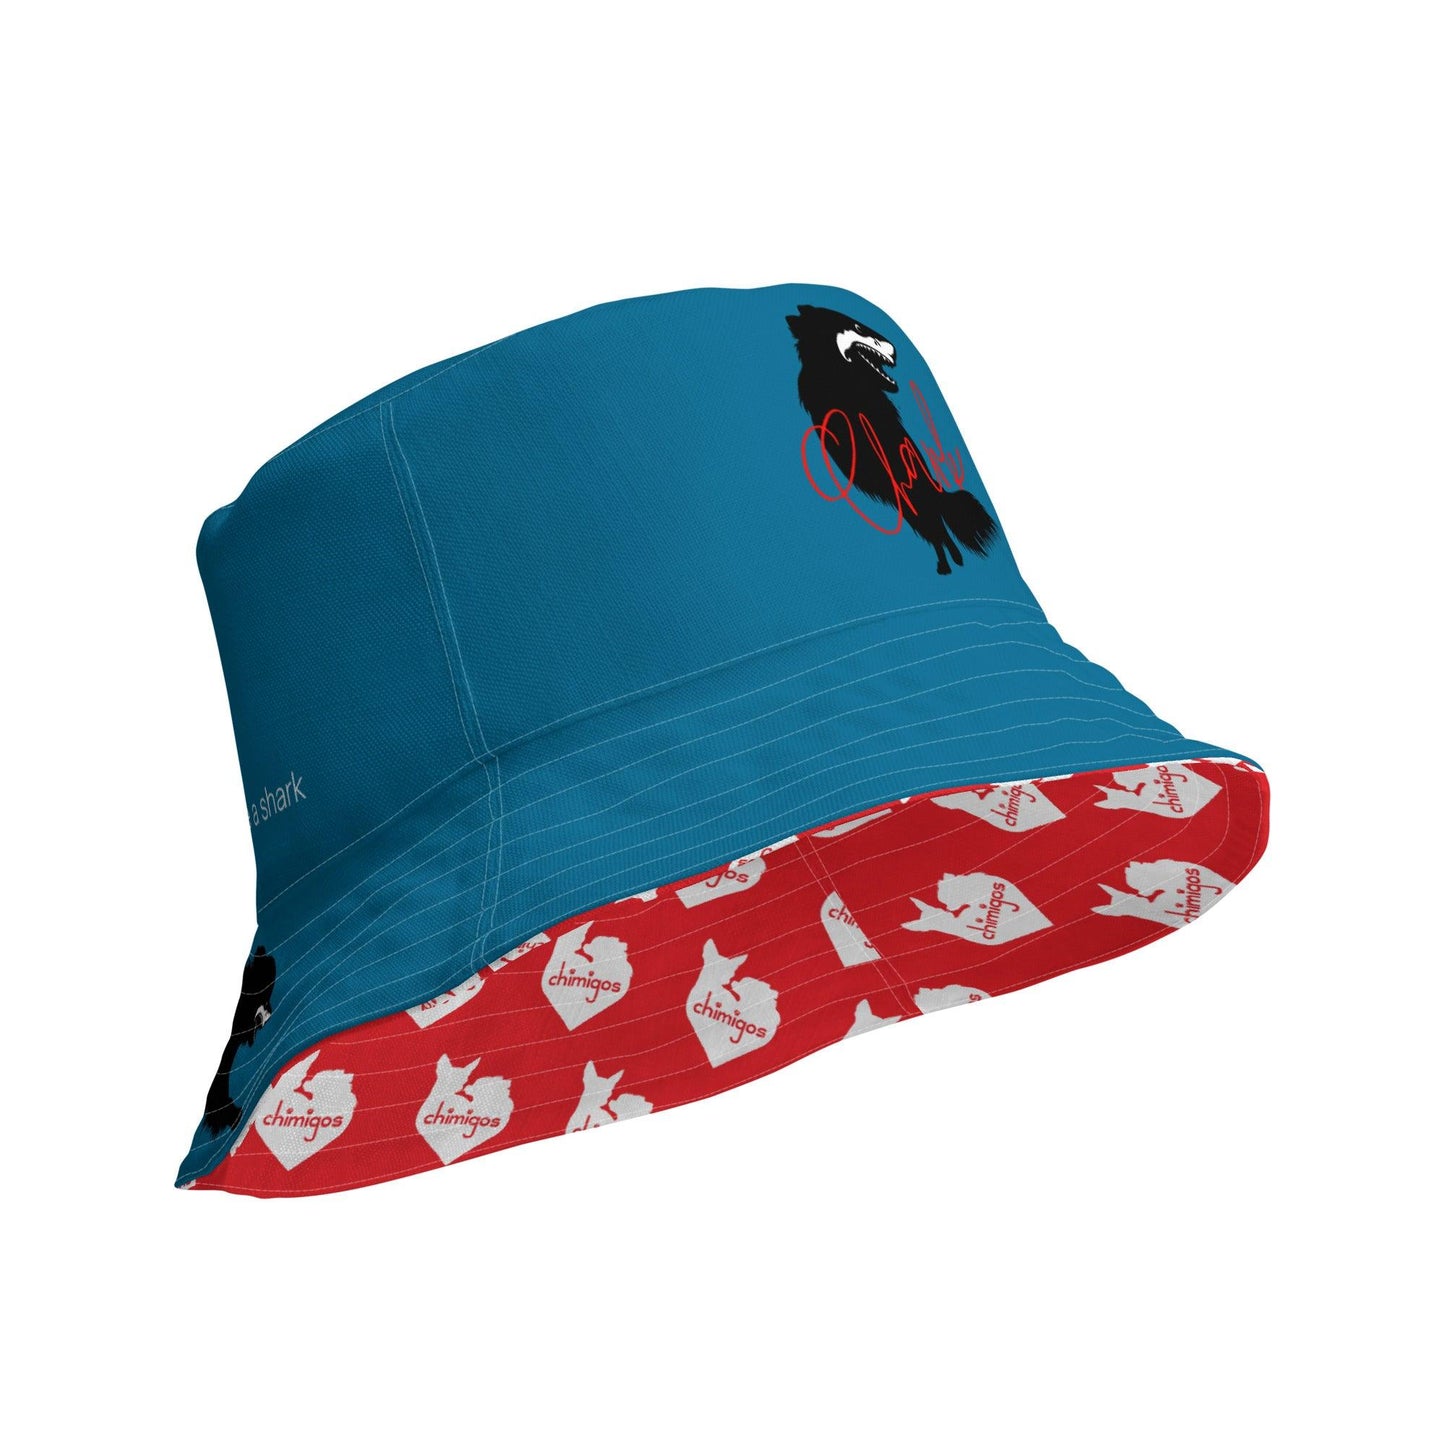 Chihuahua + Shark = Chark reversible bucket hat. Blue outer with black silhouette of a longhaired chihuahua with the face of a great white shark + "Chark" in red cursive font, and another shark-faced chihuahua silhouette running on the brim, below a dictionary entry of the noun "chark": a chihuahua with teeth like a shark. Red inner scattered with white cute love heart Chimigos logos. Unisex in two sizes. Design by Renate Kriegler, owner of Chimigos - for the love of chihuahuas. More on chimigos.com